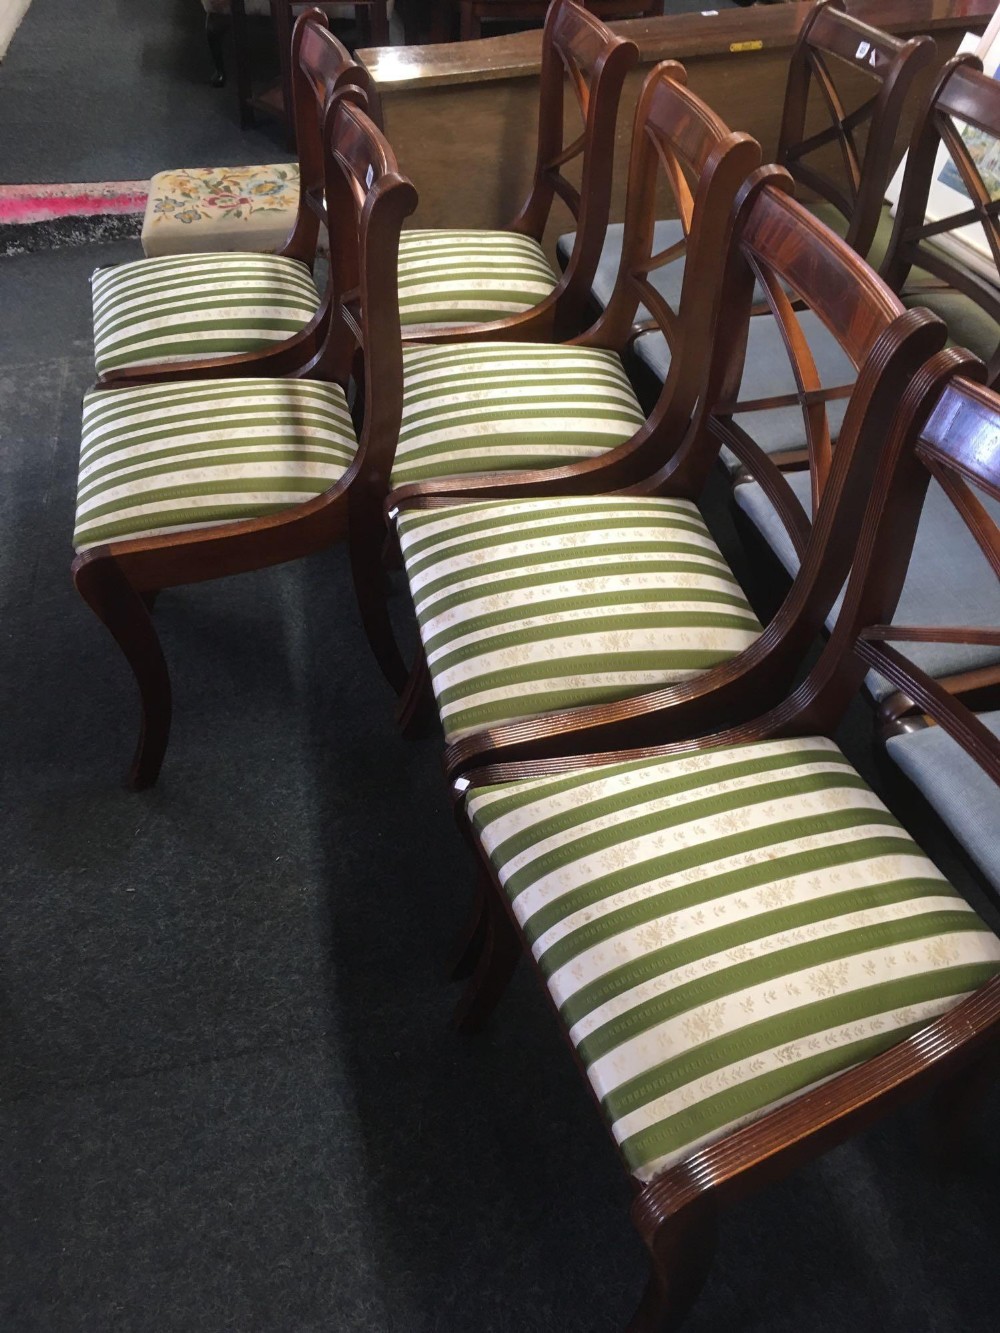 SET OF 6 MODERN MAHOGANY DINING CHAIRS WITH GREEN STRIPPED UPHOLSTERED SEATS - Image 3 of 3